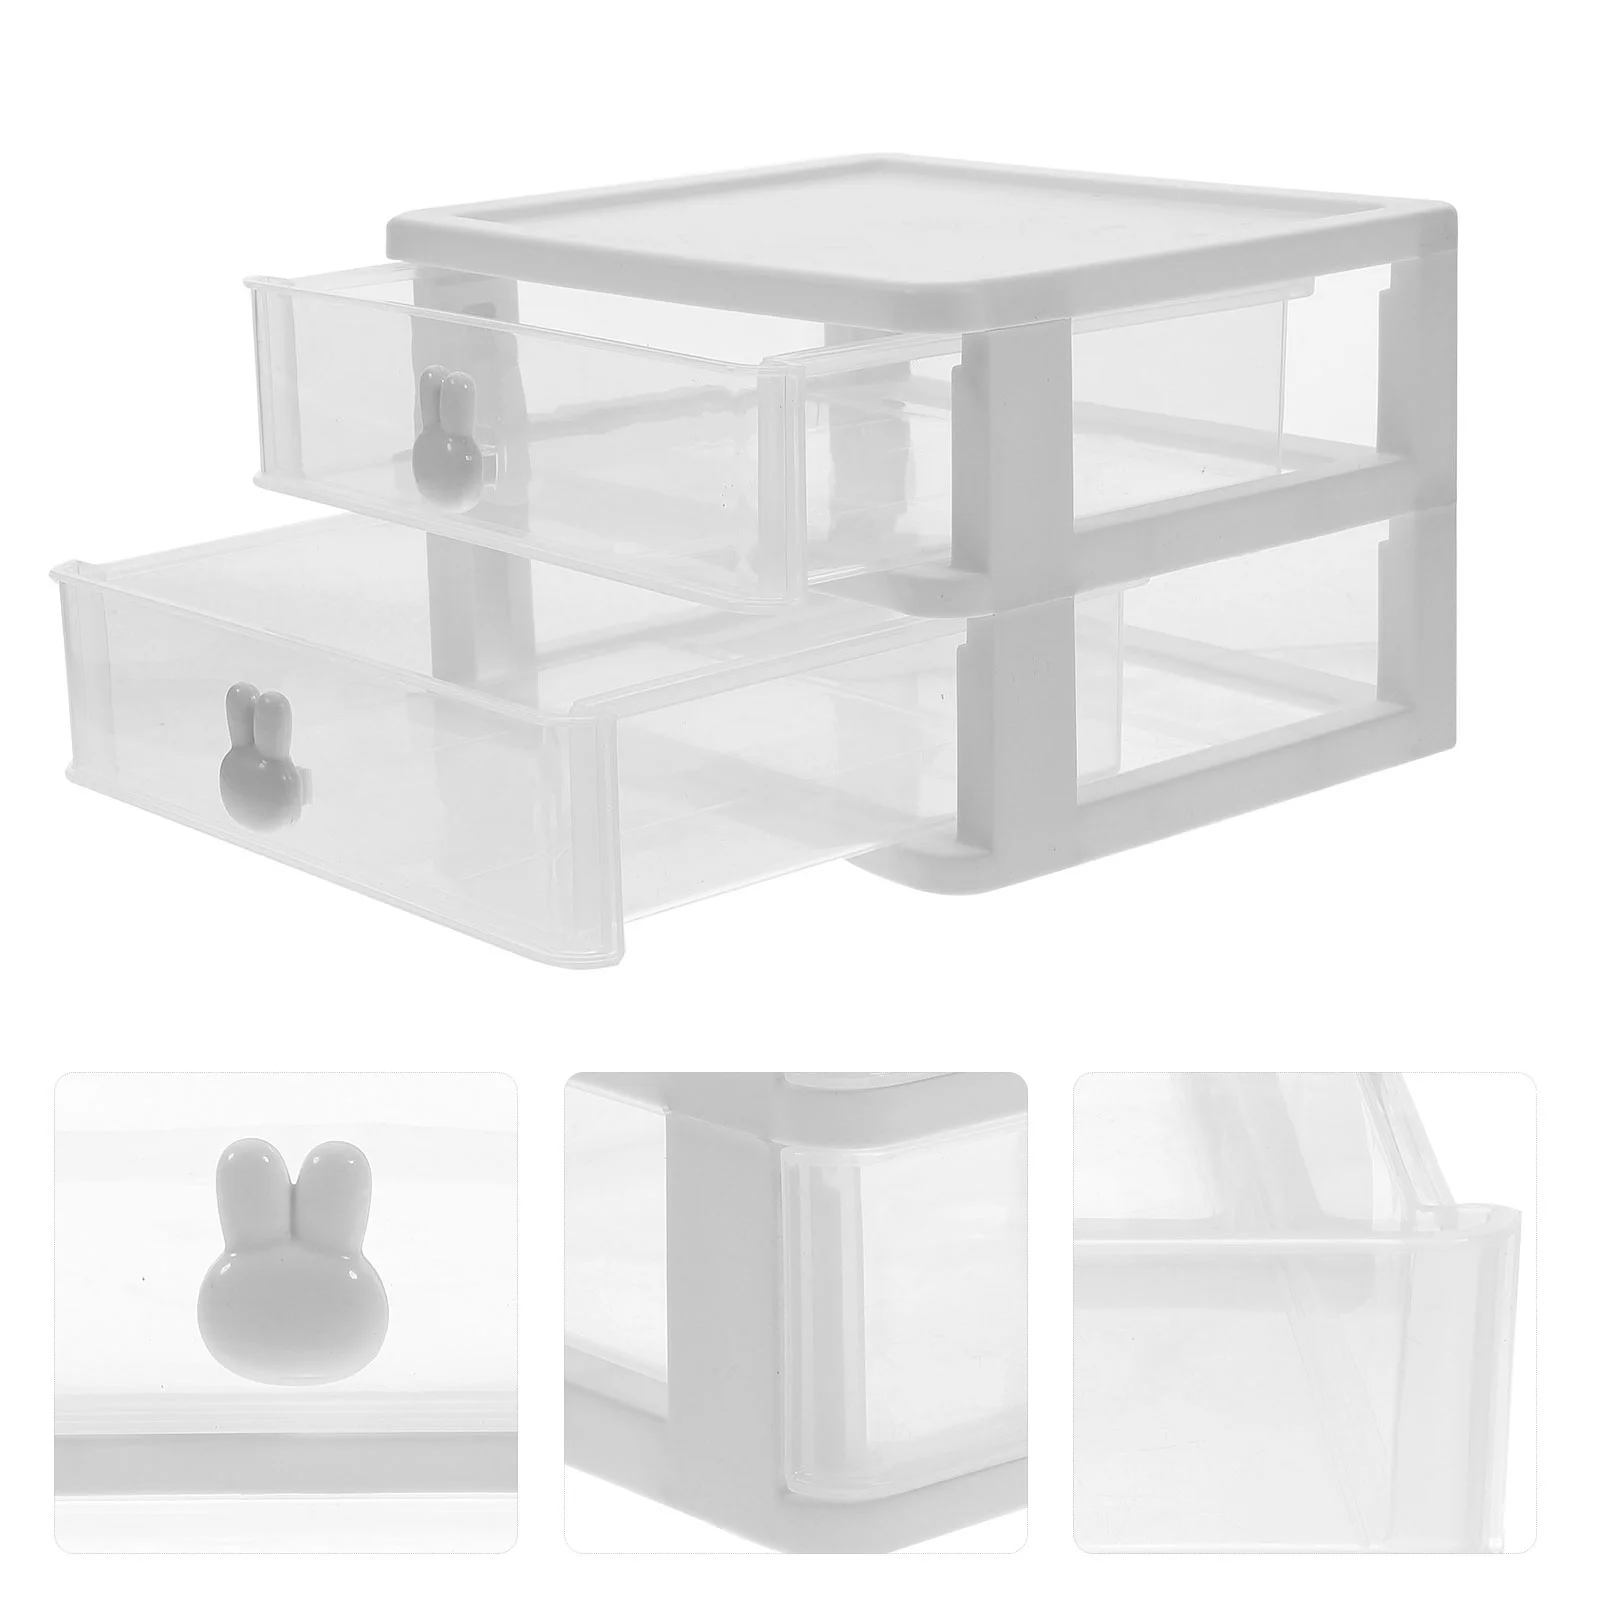 Desktop Storage Box Drawer Type Case Boxes Drawers Plastic Organizer Style Makeup with Tabletop Decorative